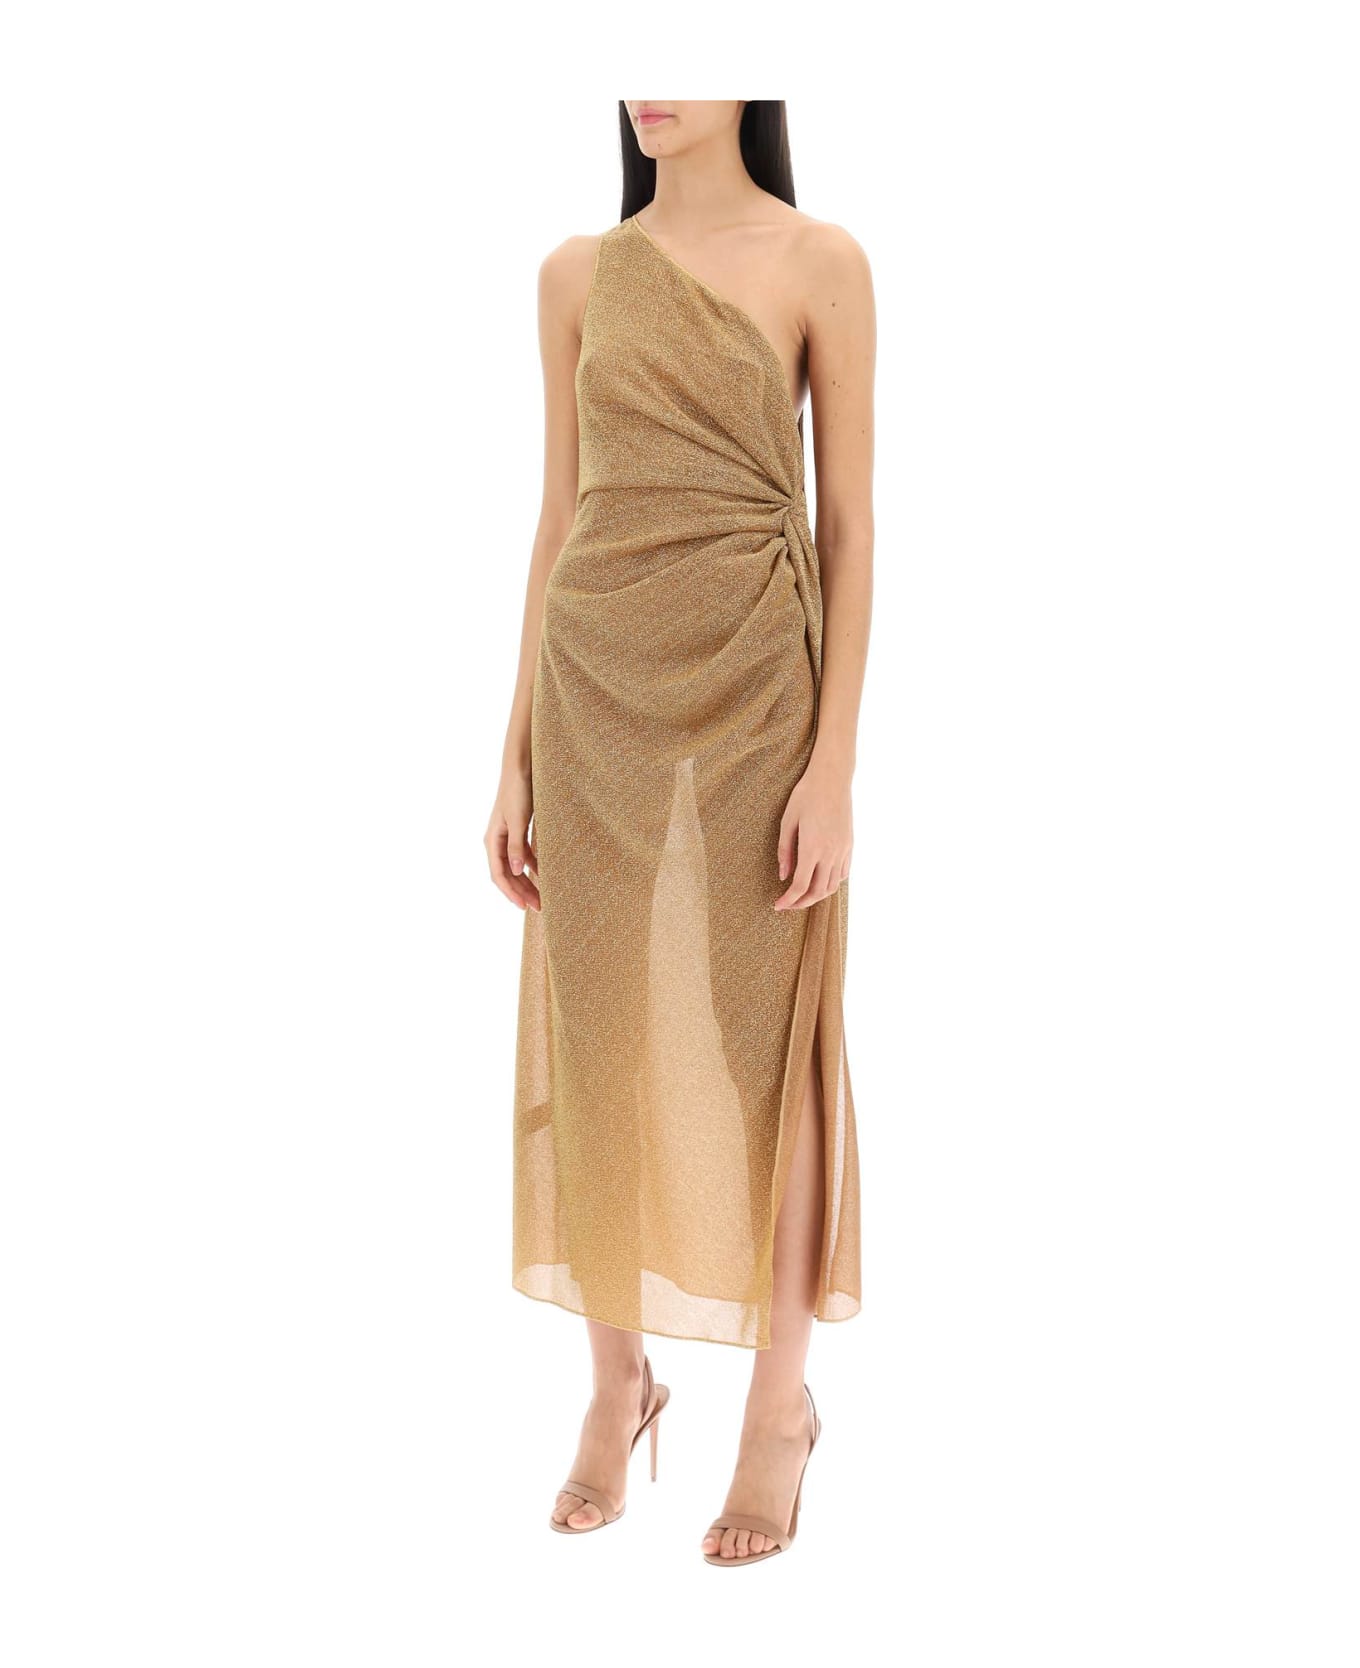 Oseree One-shoulder Dress In Lurex Knit - TOFFEE (Gold)